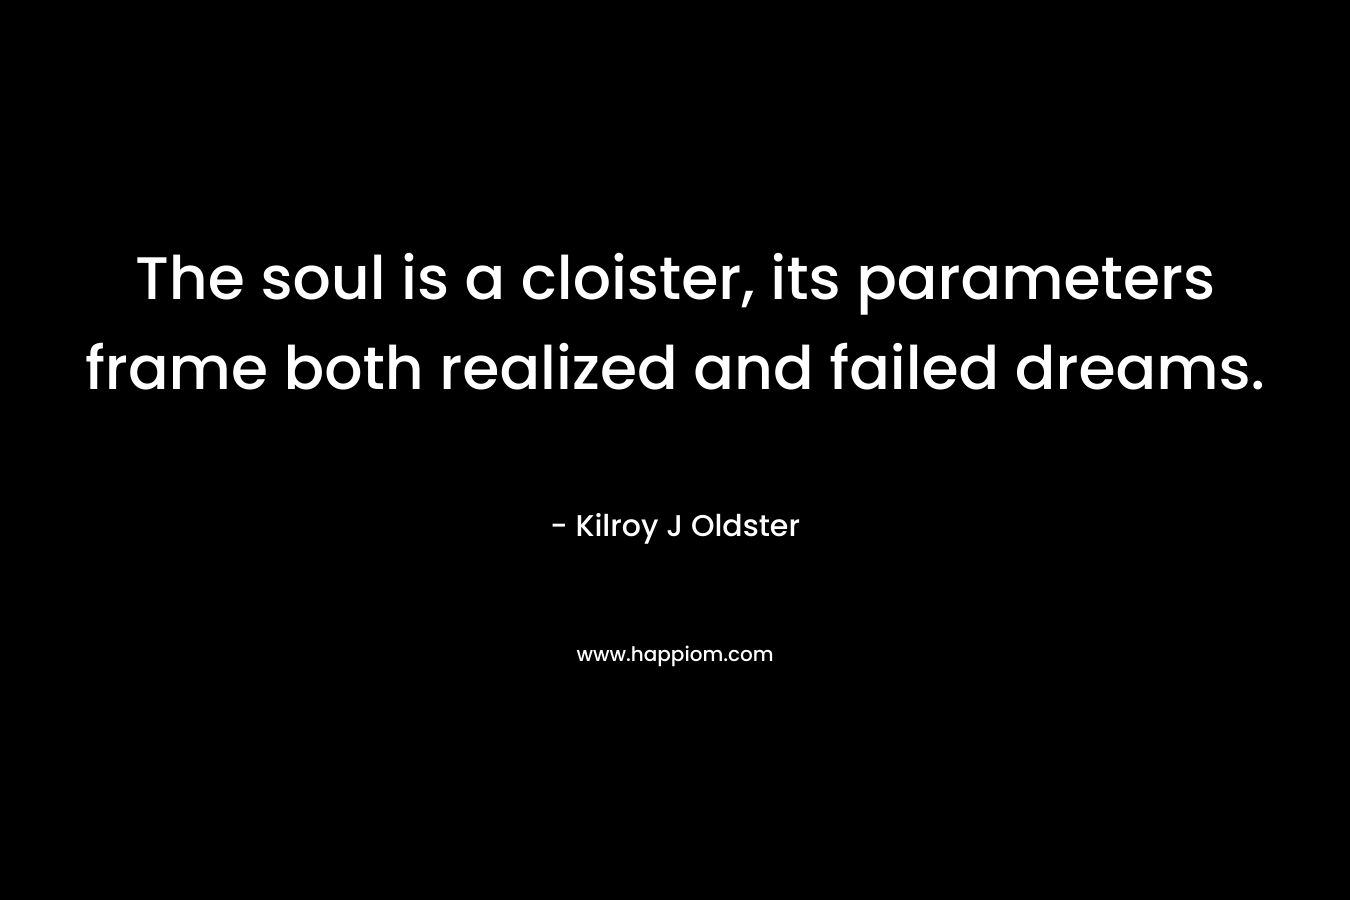 The soul is a cloister, its parameters frame both realized and failed dreams.